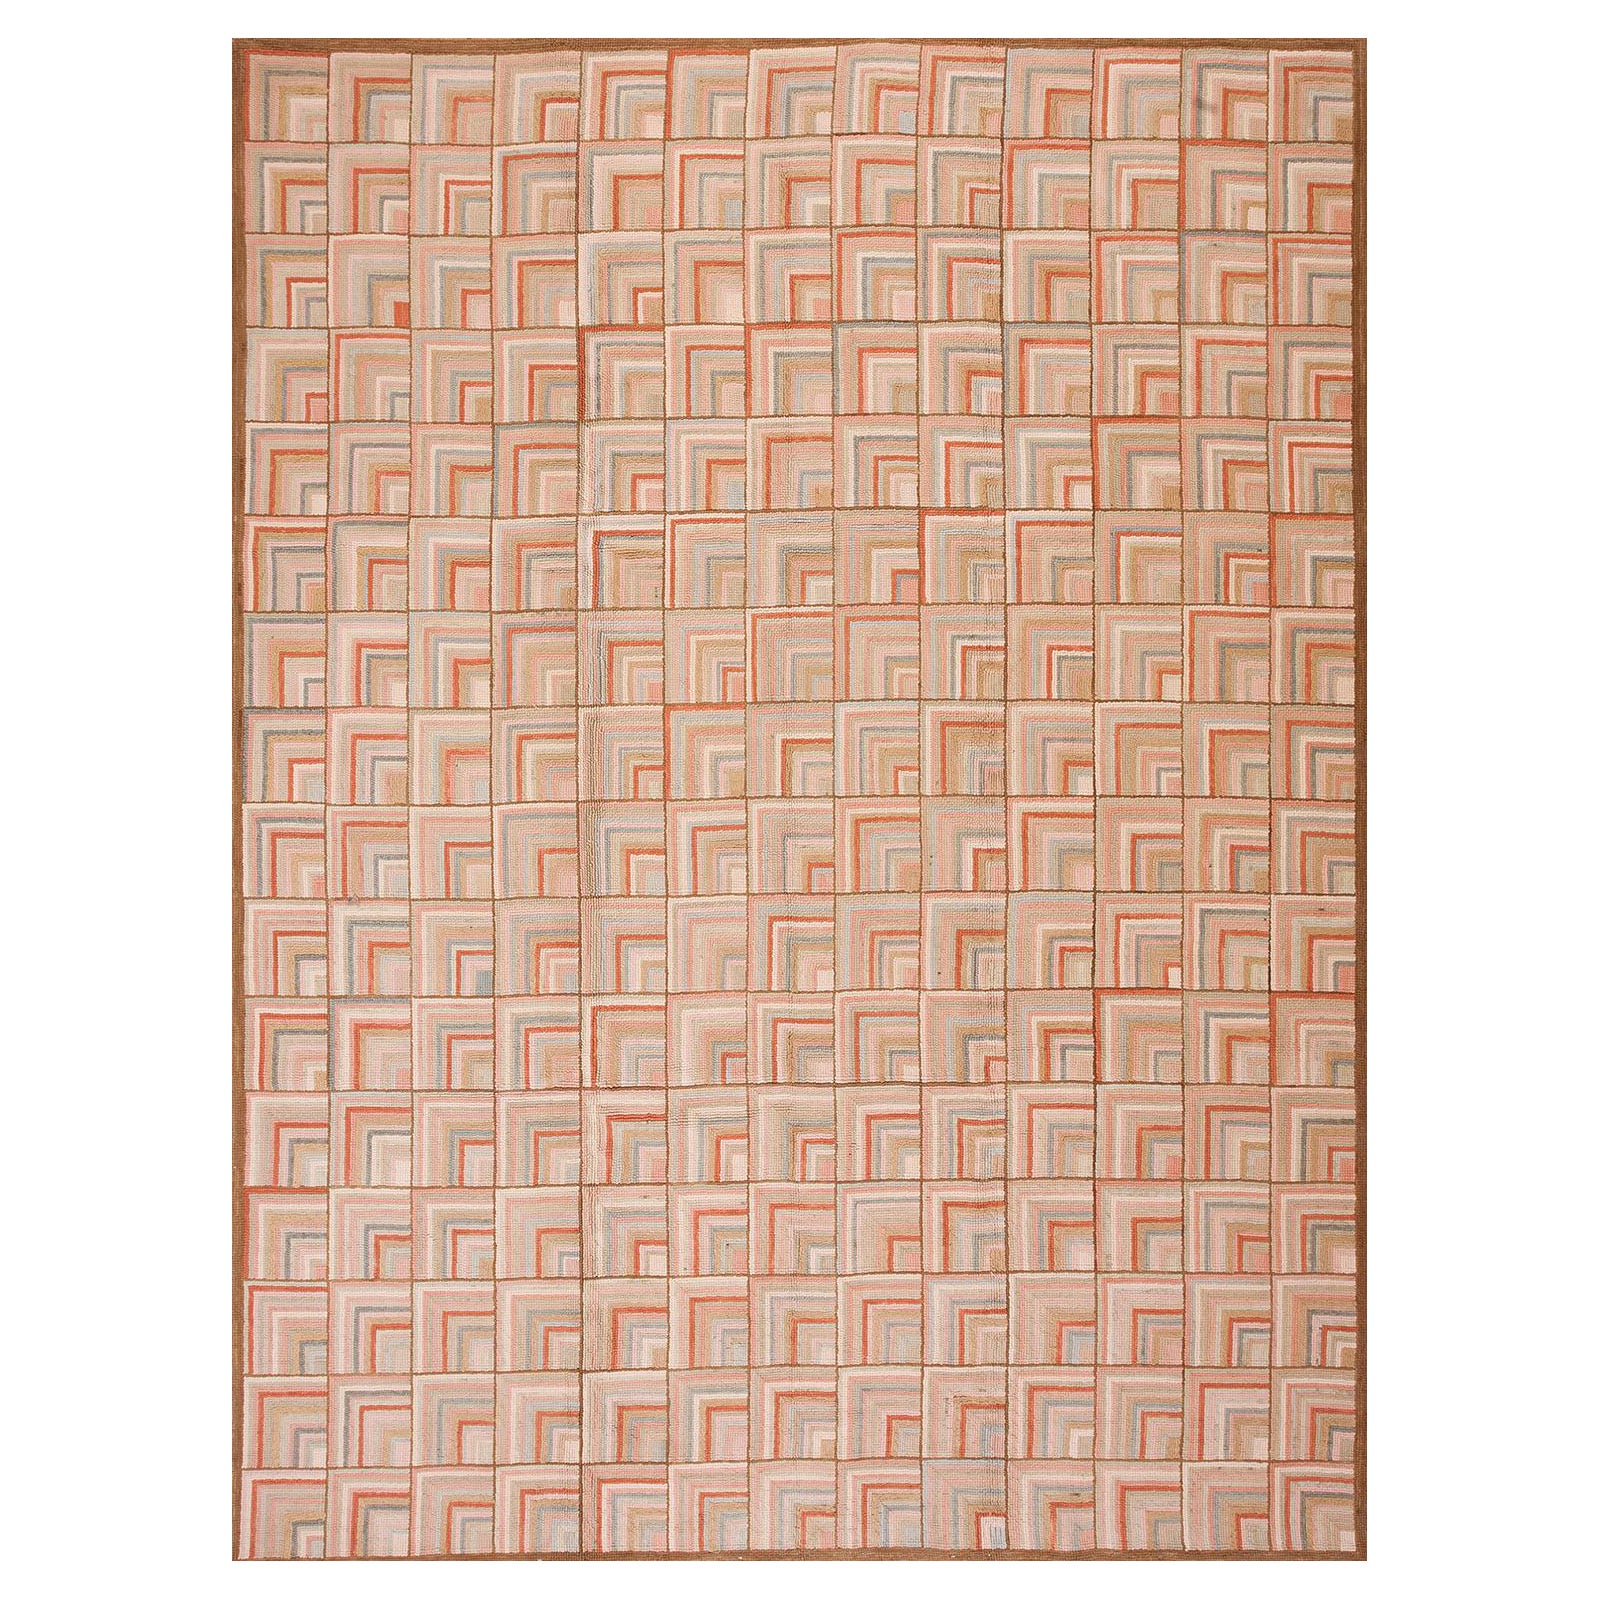  Contemporary Cotton Hooked Rug ( 9' x 12' - 275 x 365 ) For Sale